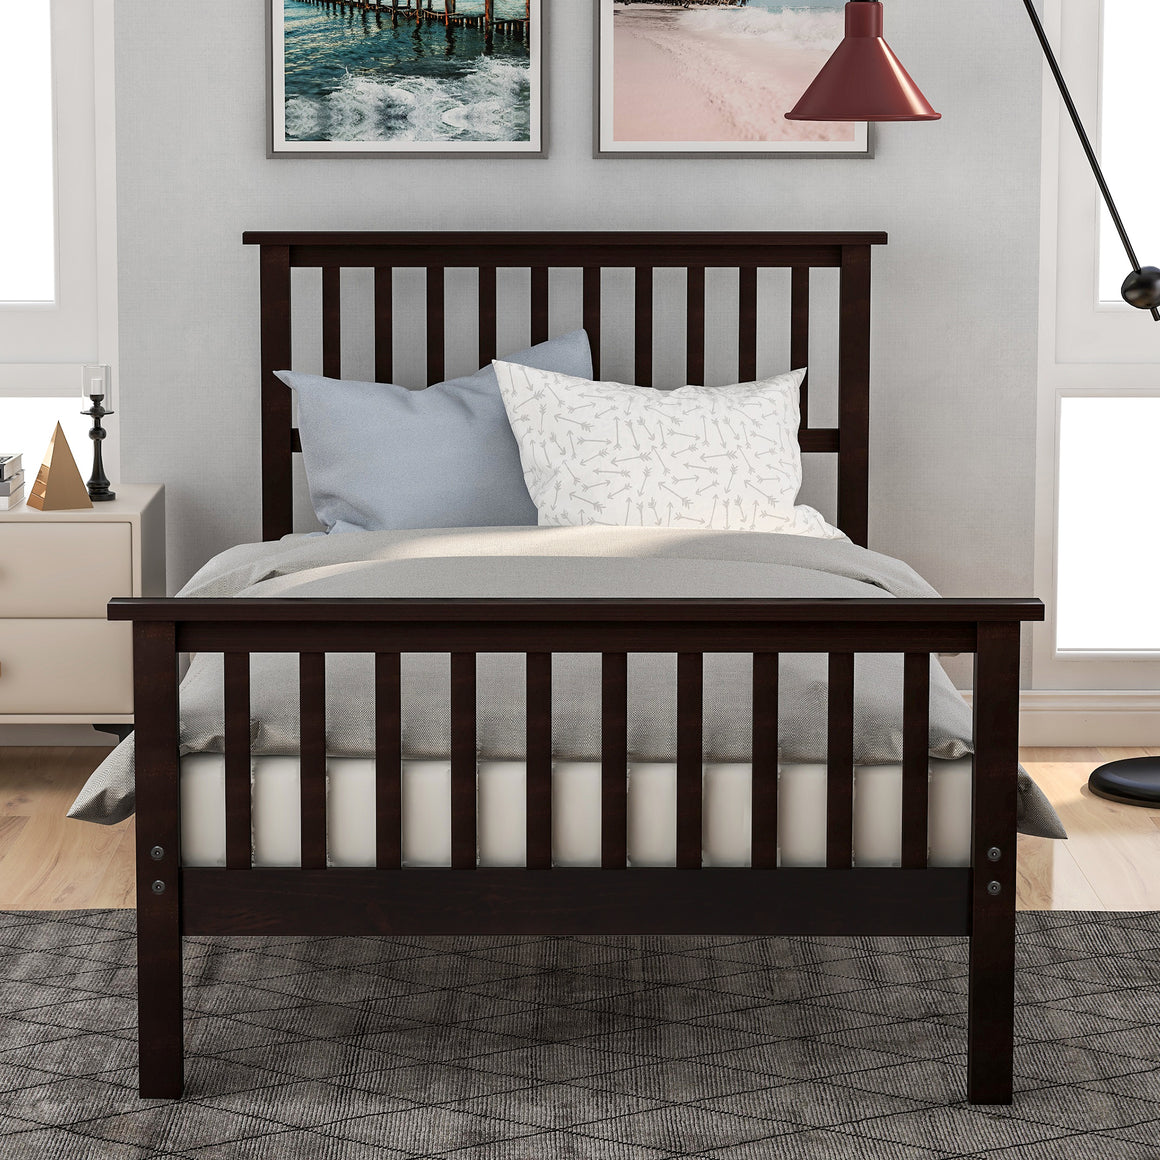 Platform Bed Frame Kids Bed with Headboard and Footboard, Classic Twin Bed Frame for Kids, Solid Wood Twin Size Bed Frame with Wood Slats Support, Holds 200 lb, No Box Spring Needed, Espresso